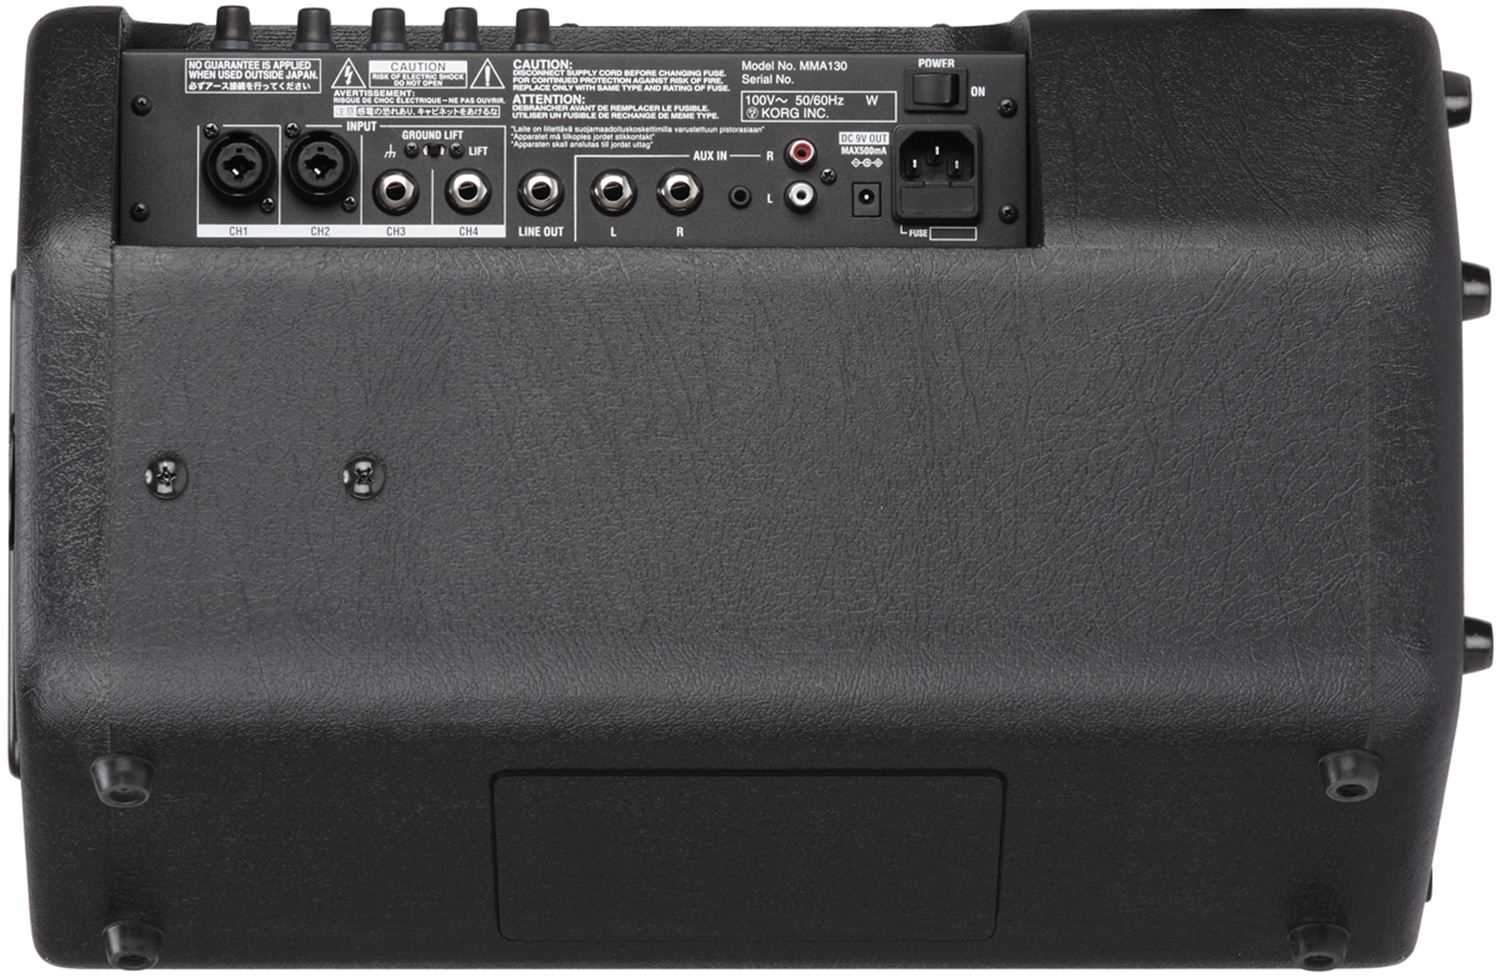 Korg MMA130 Mobile Powered Monitor - PSSL ProSound and Stage Lighting